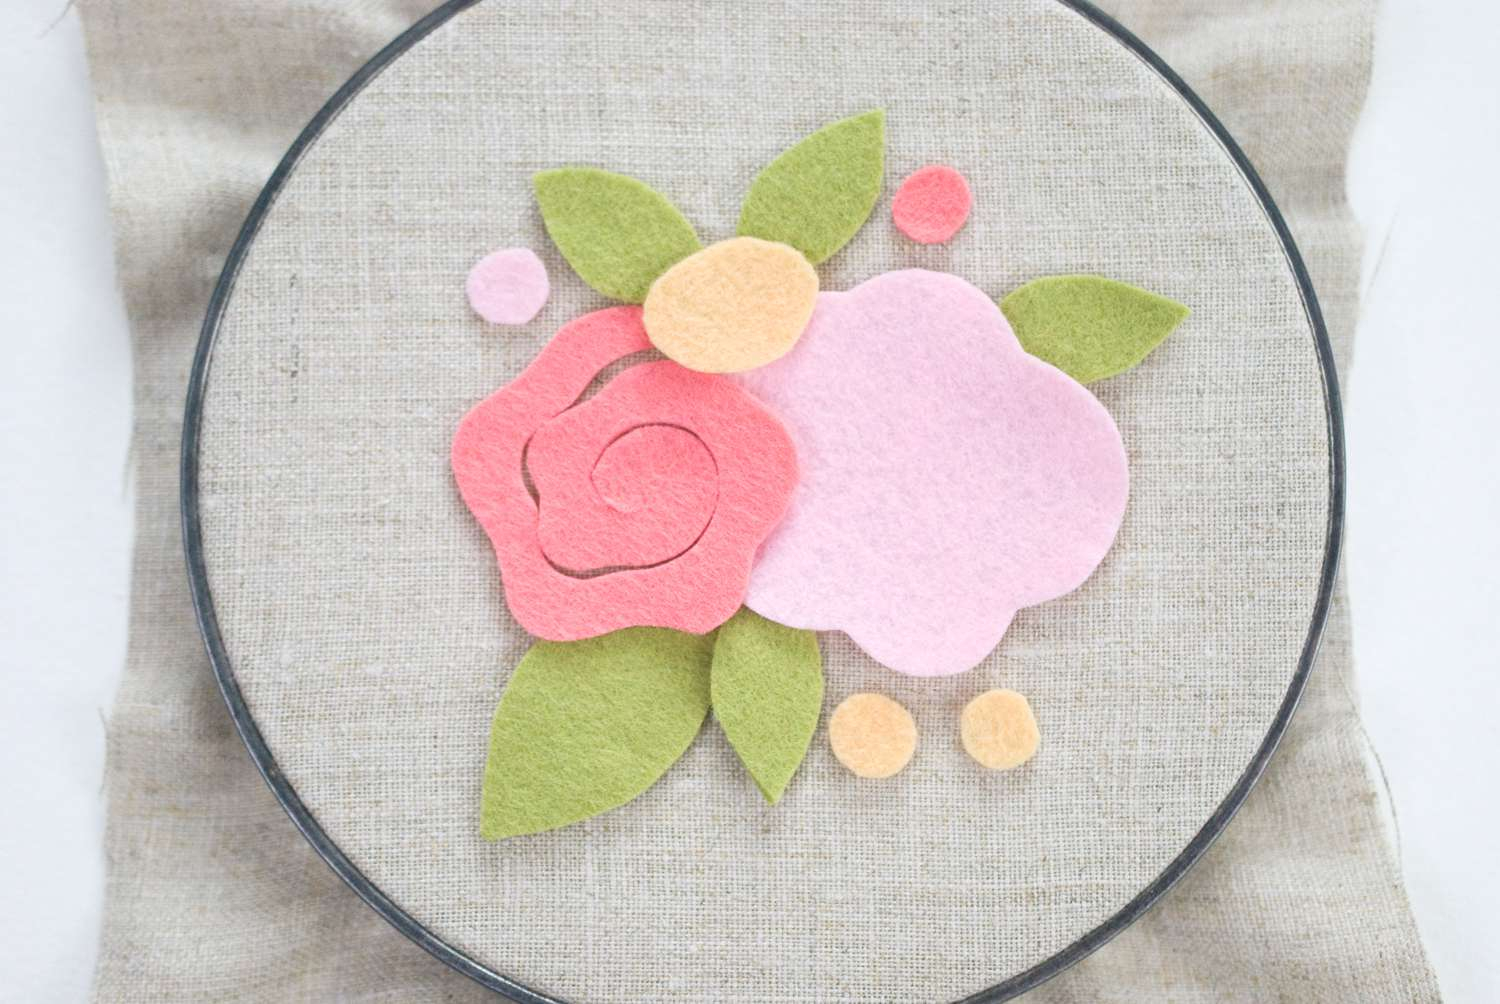 Felt Embroidery Patterns How To Create Embroidered Felt Flowers